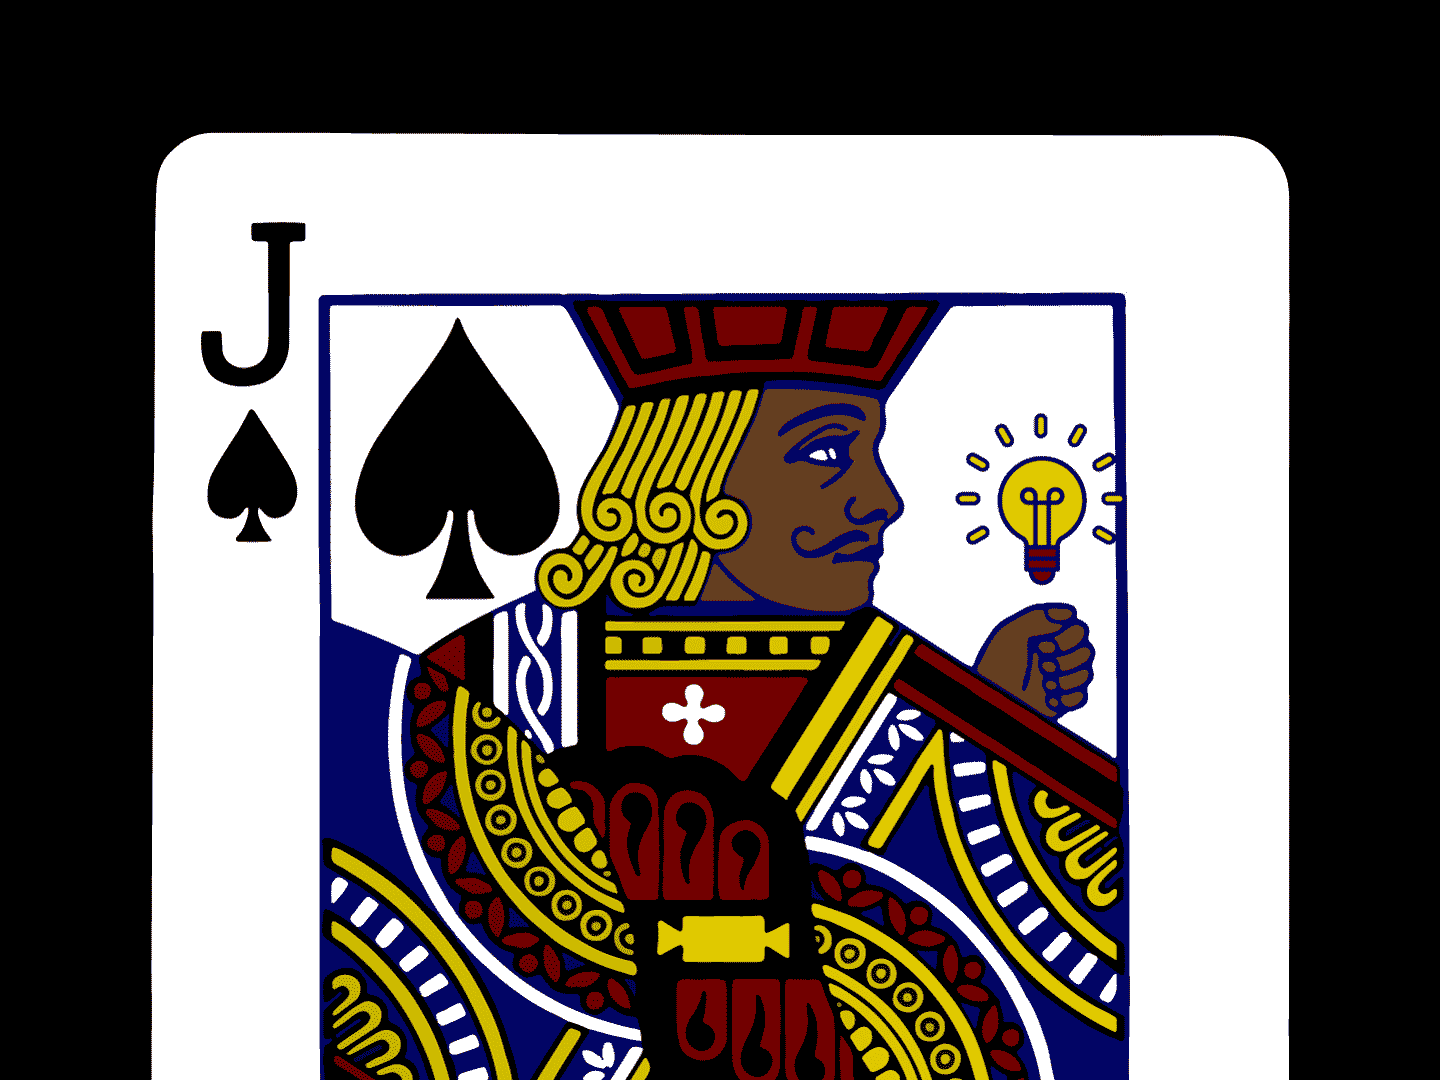 Black Jack of Spades Light Bulb Idea graphic edited by Michael Wright